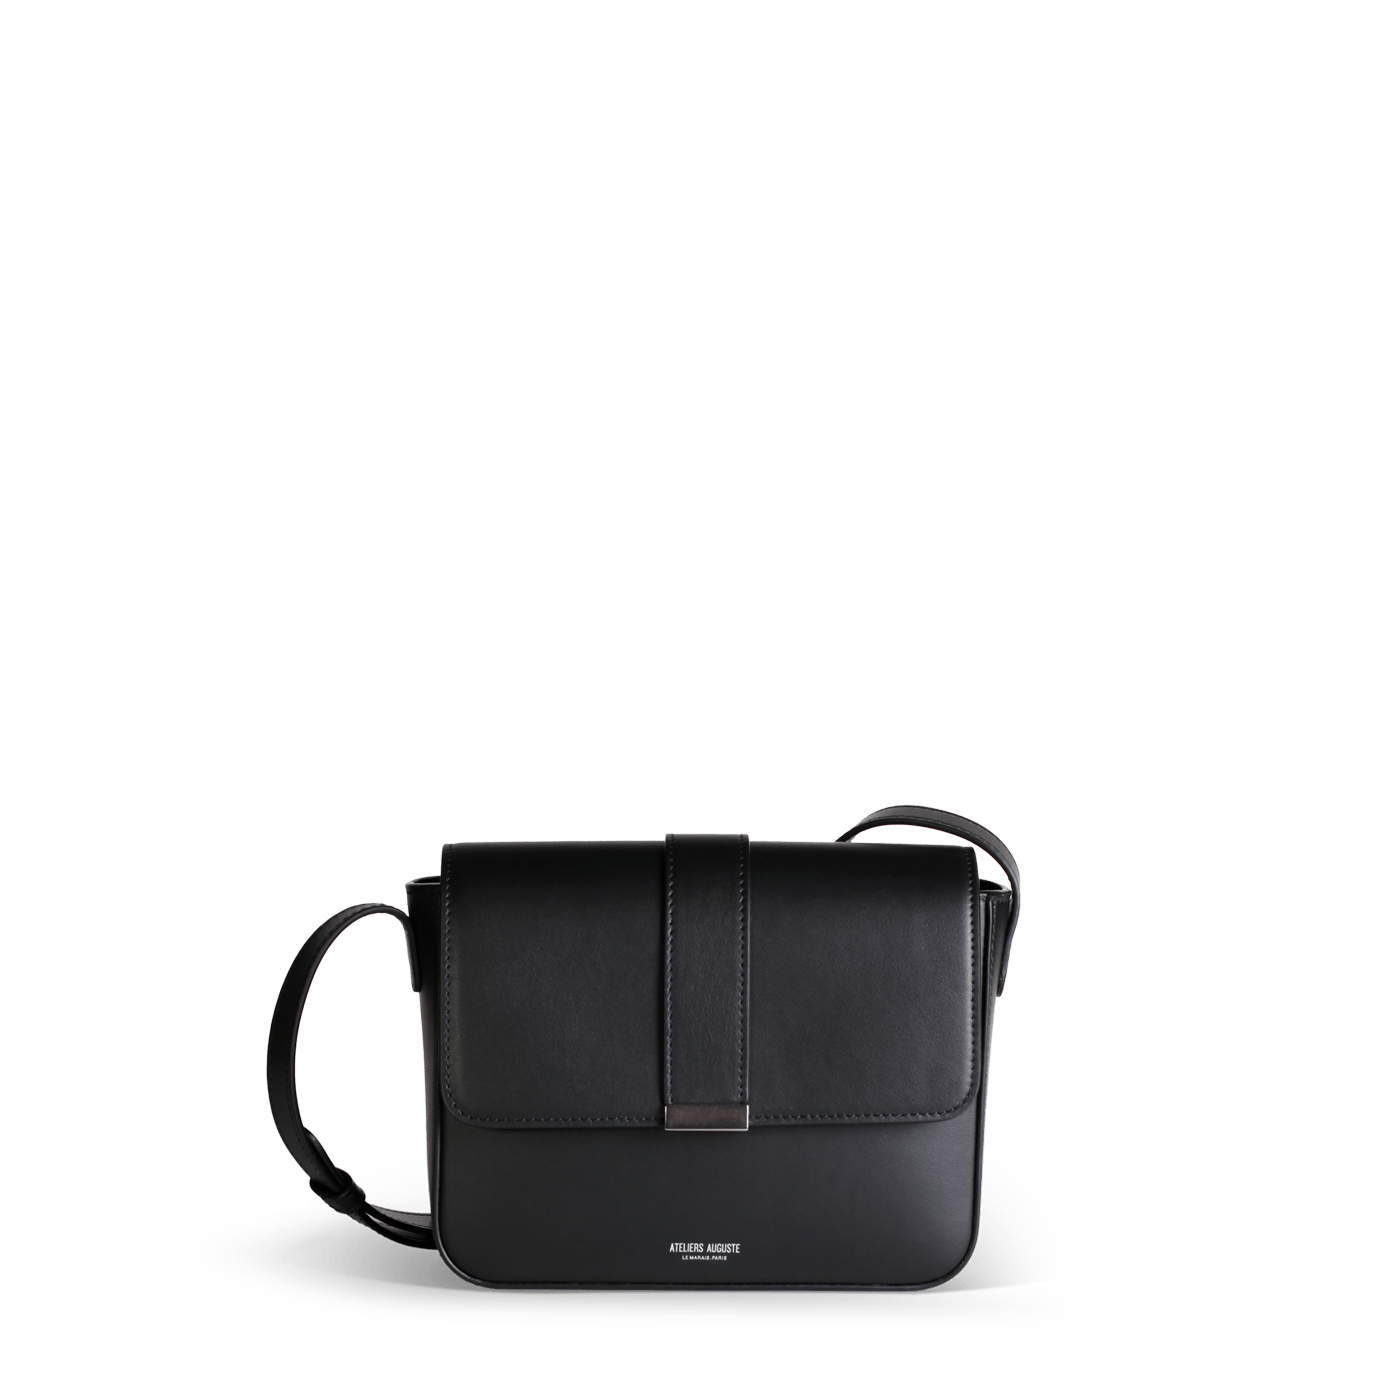 What fits in my mini monceau crossbody